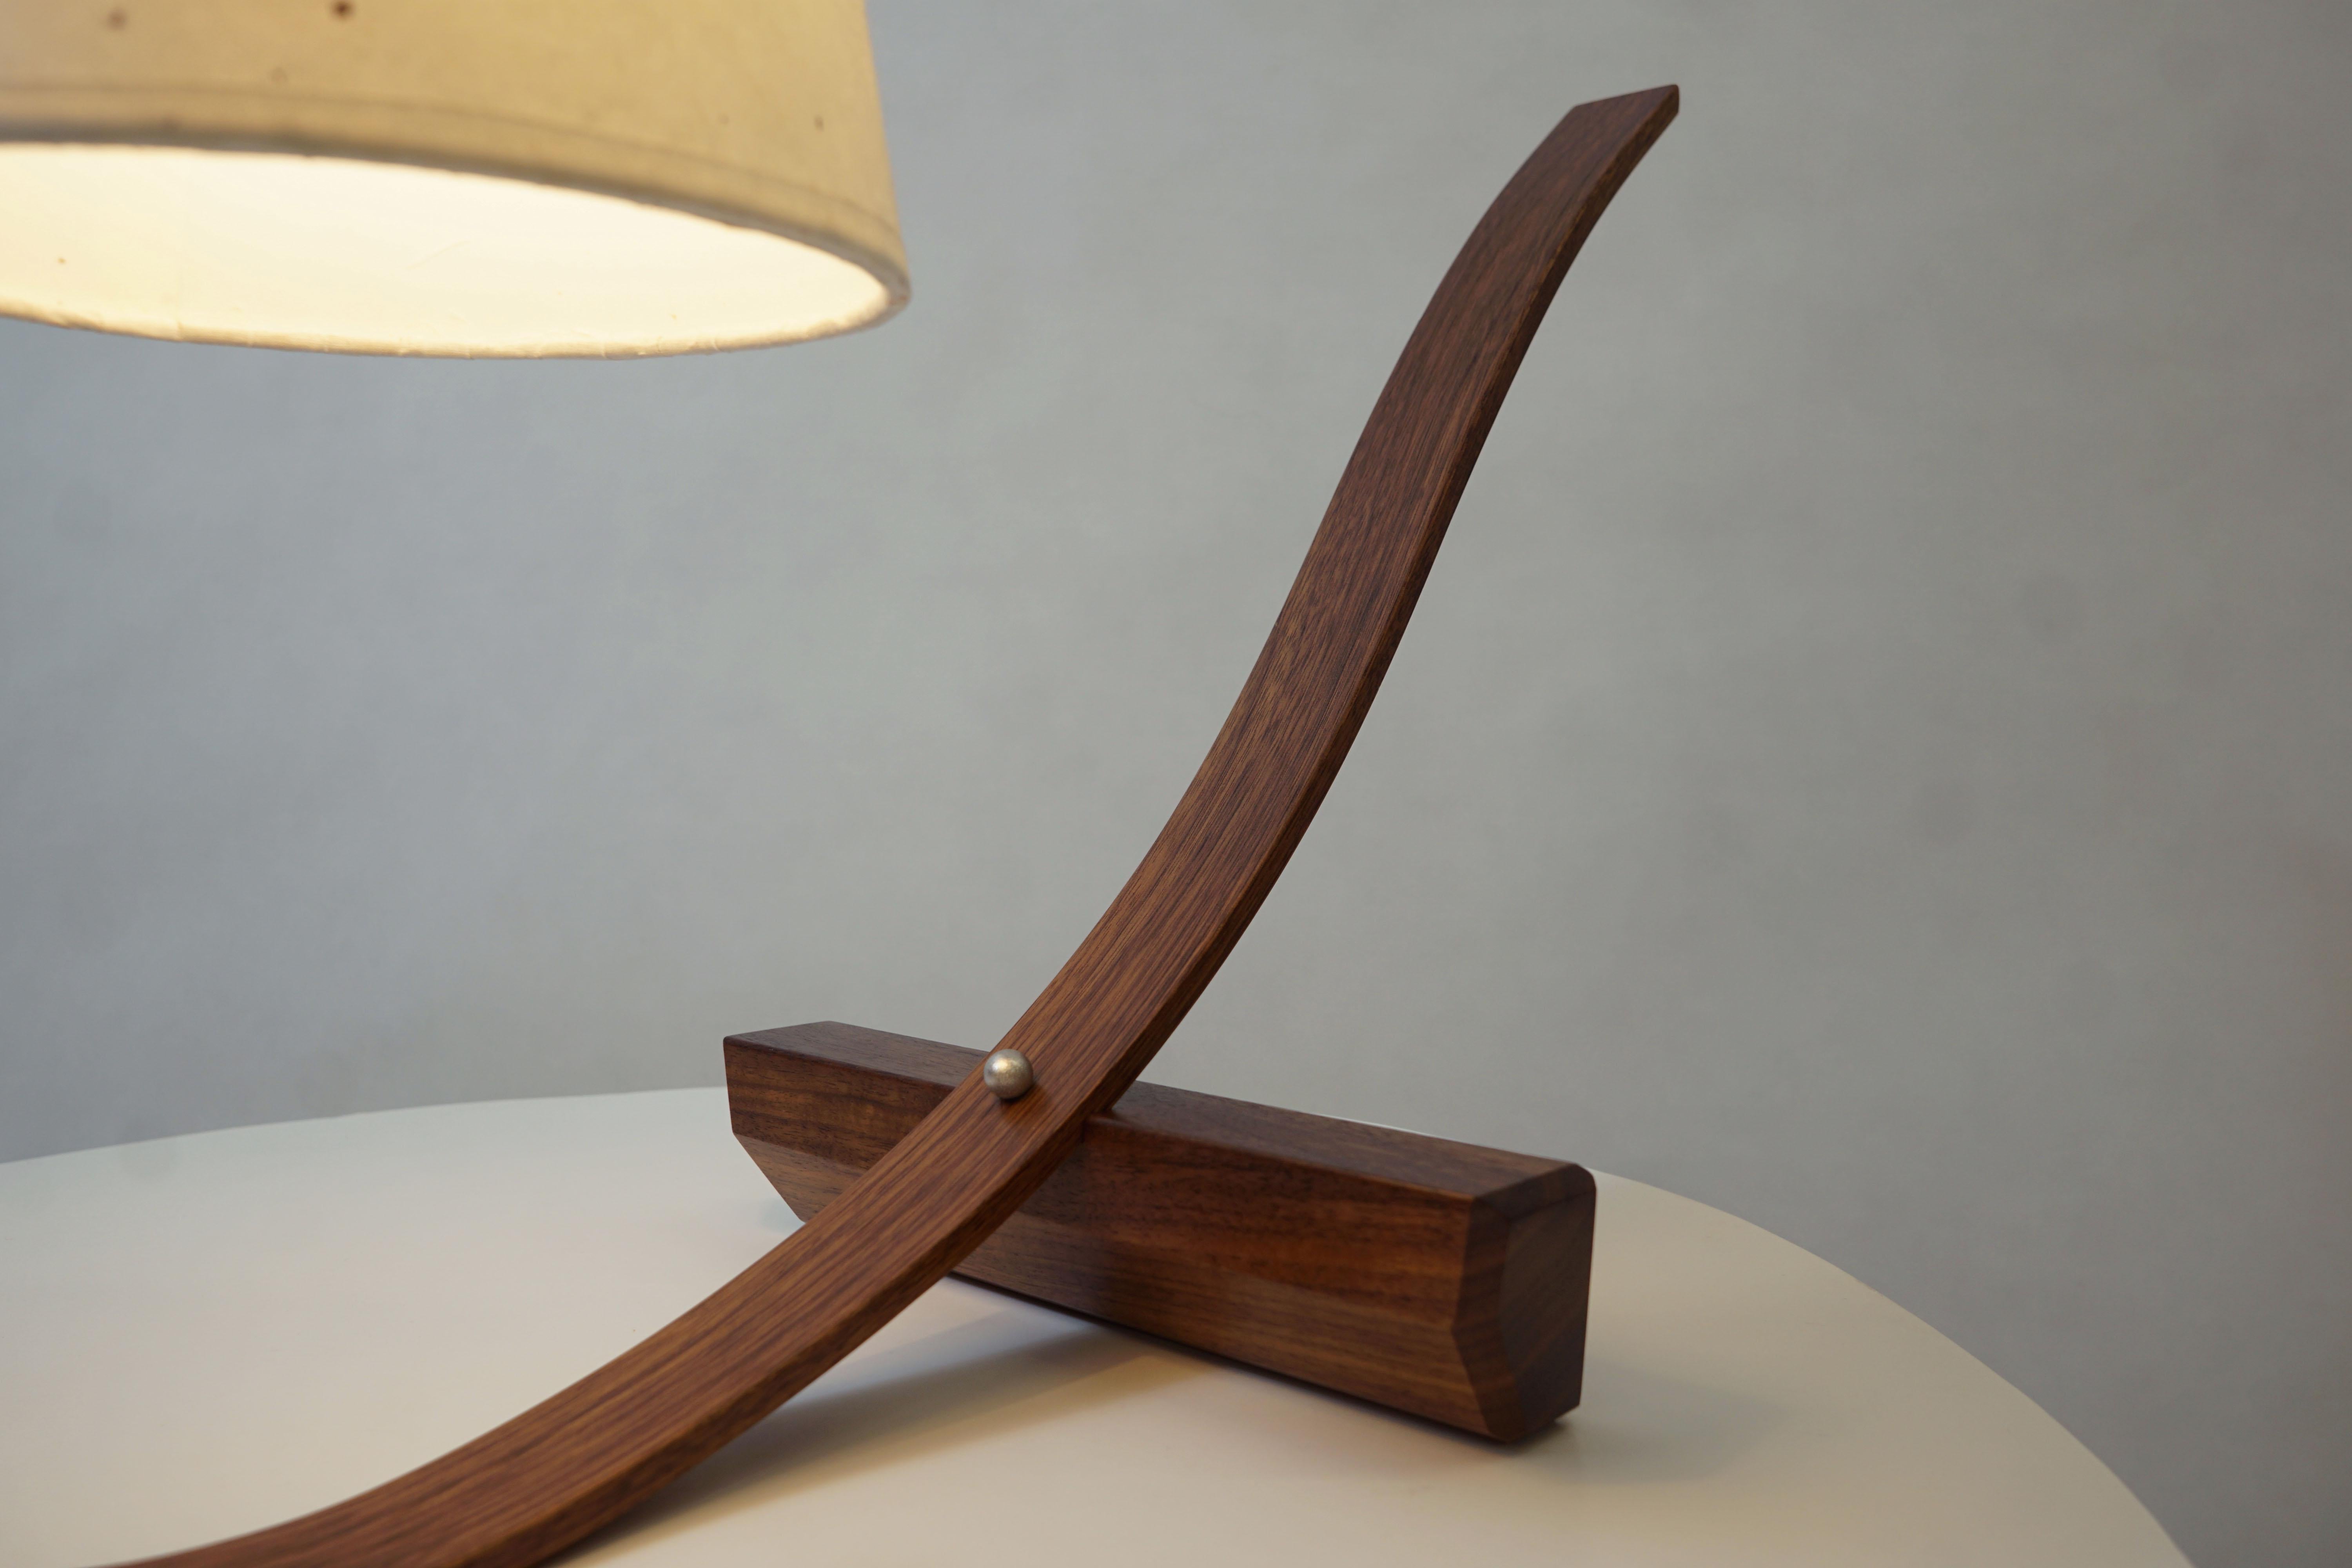 Contemporary Curved Table Lamp Sculpture, Handcrafted in Walnut Wood with Walnut Base For Sale